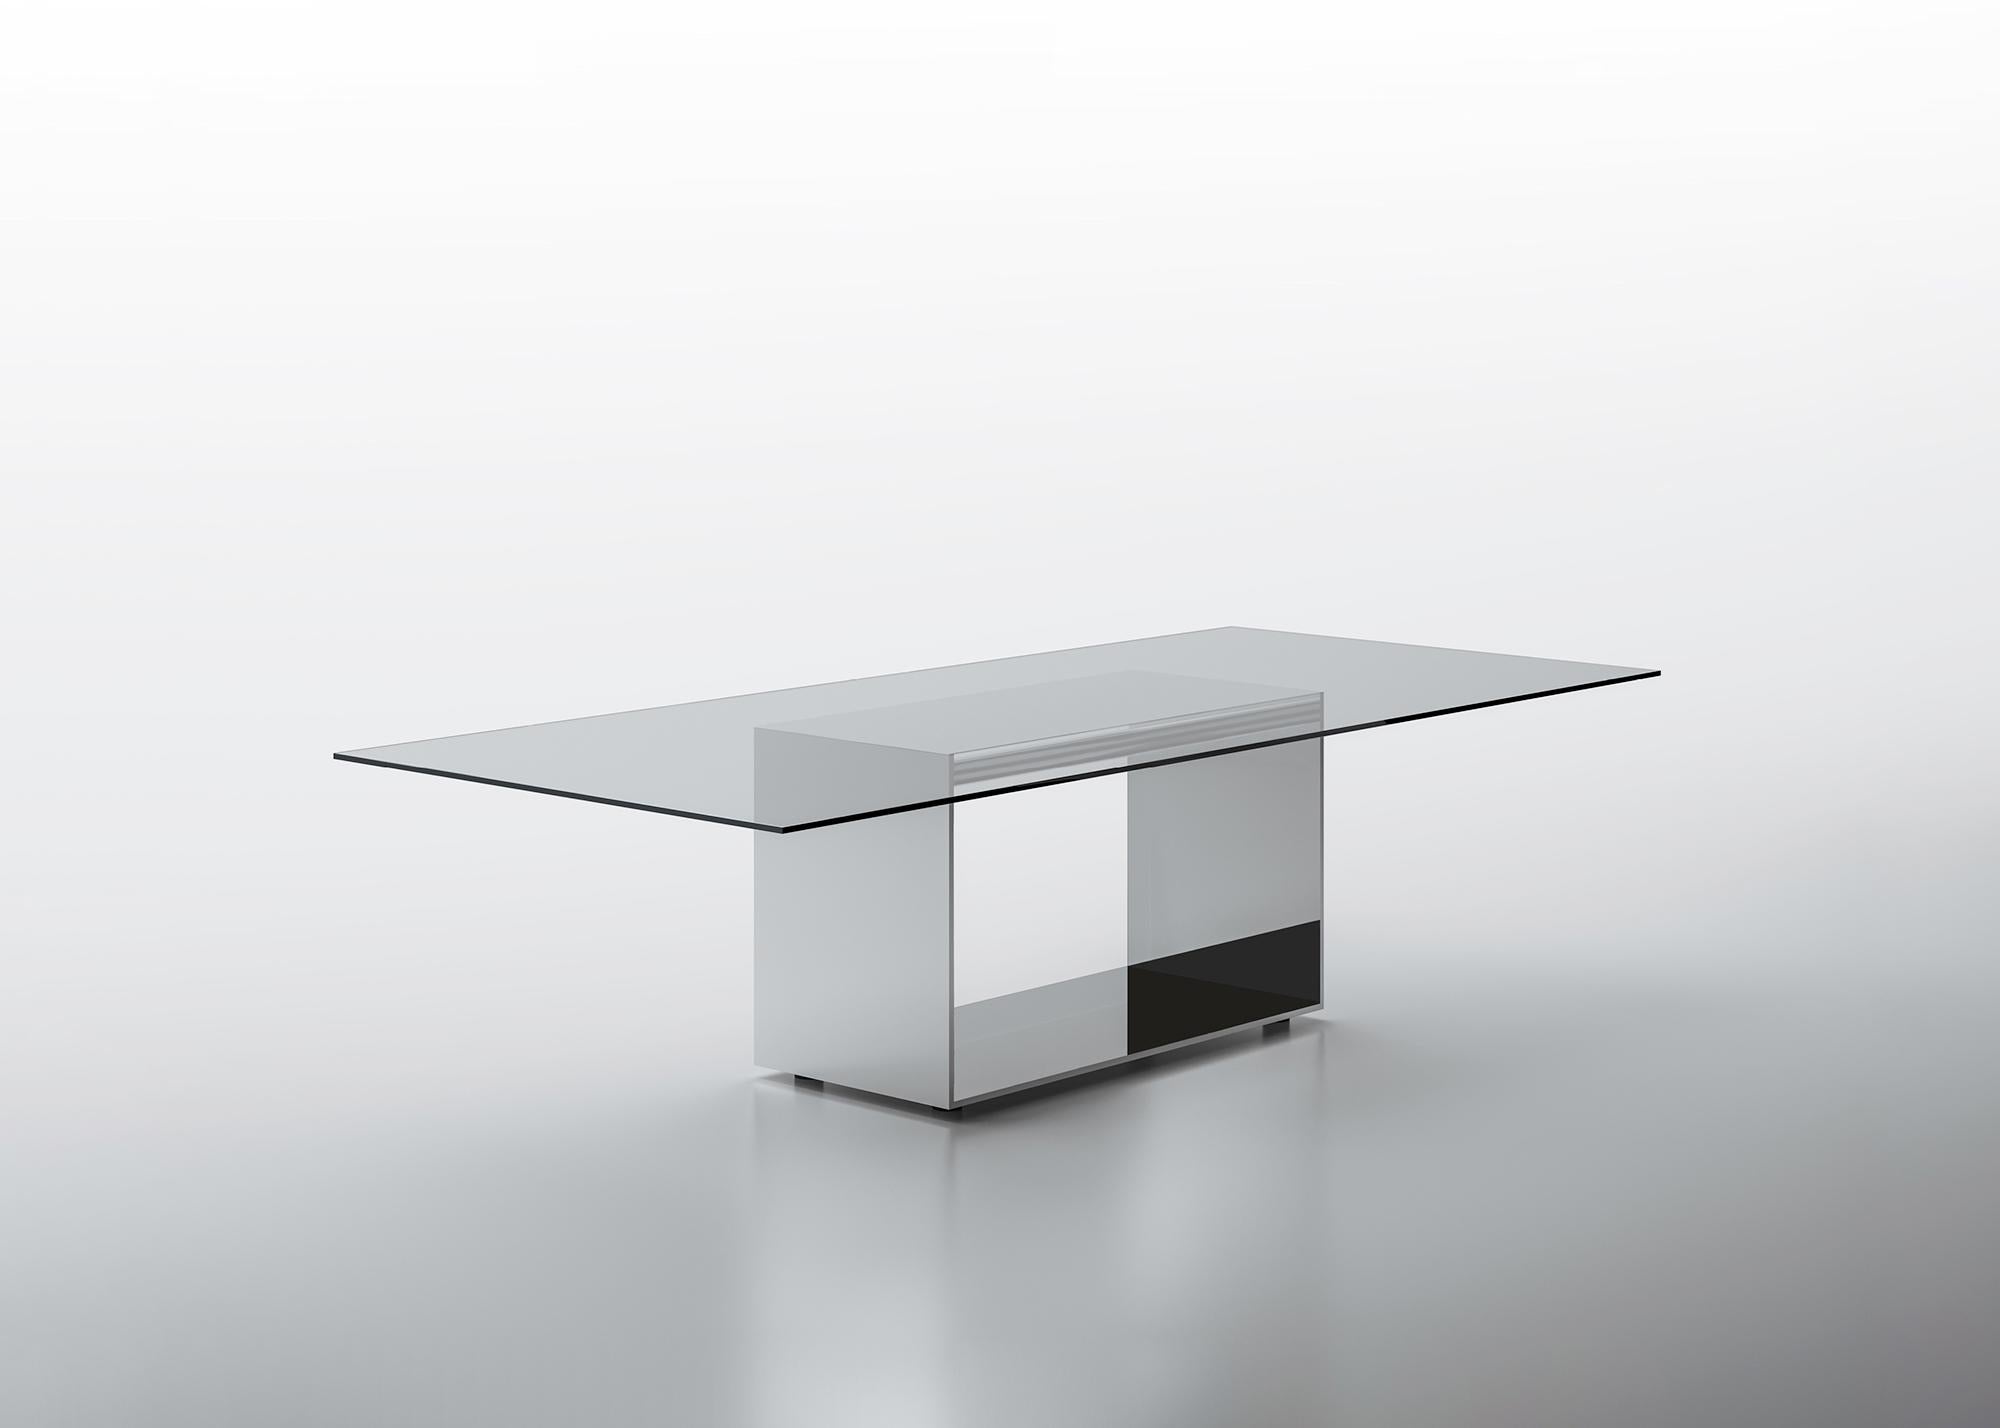 Judd is a system of tables that combines an essential line with rich materials. An innovative structural panel forms the base of the table. The exterior is in bright polished stainless steel, the interior is finished with mirror, lead mirror or